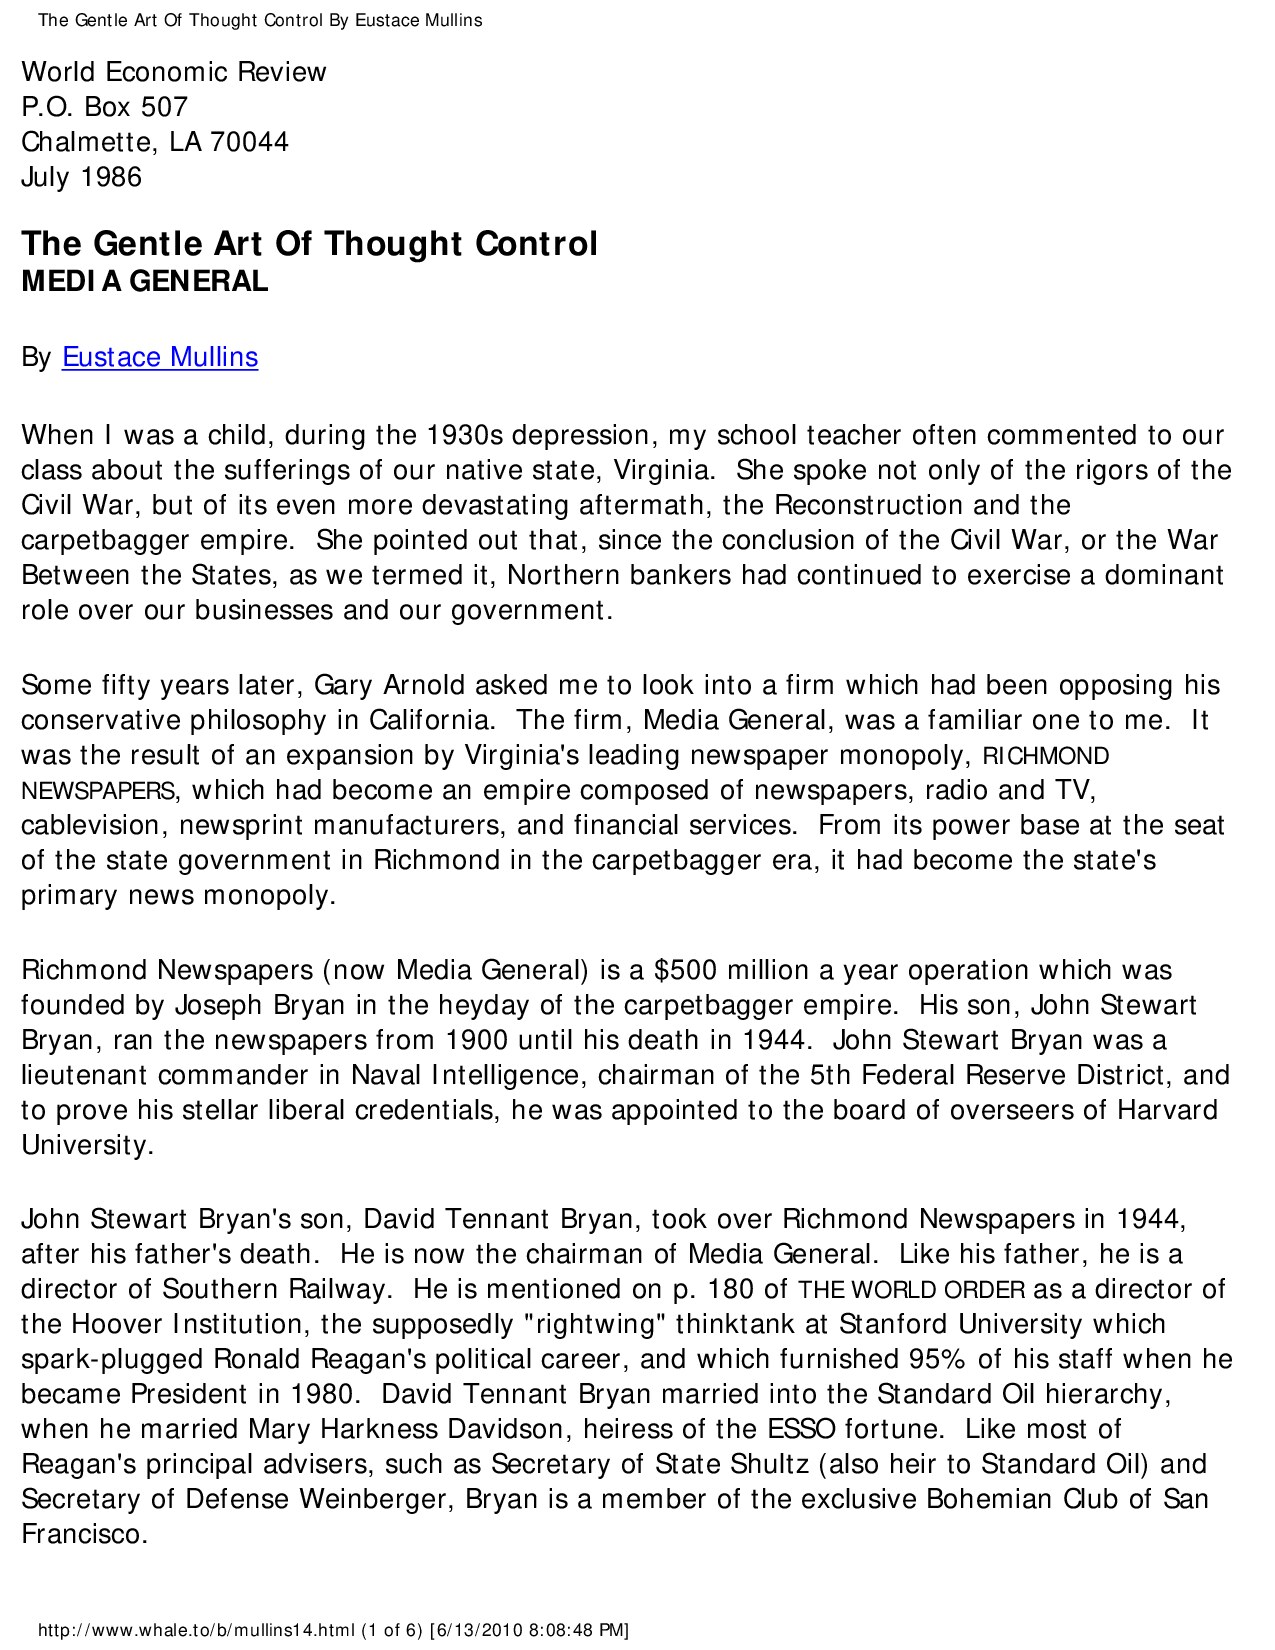 The Gentle Art Of Thought Control By Eustace Mullins